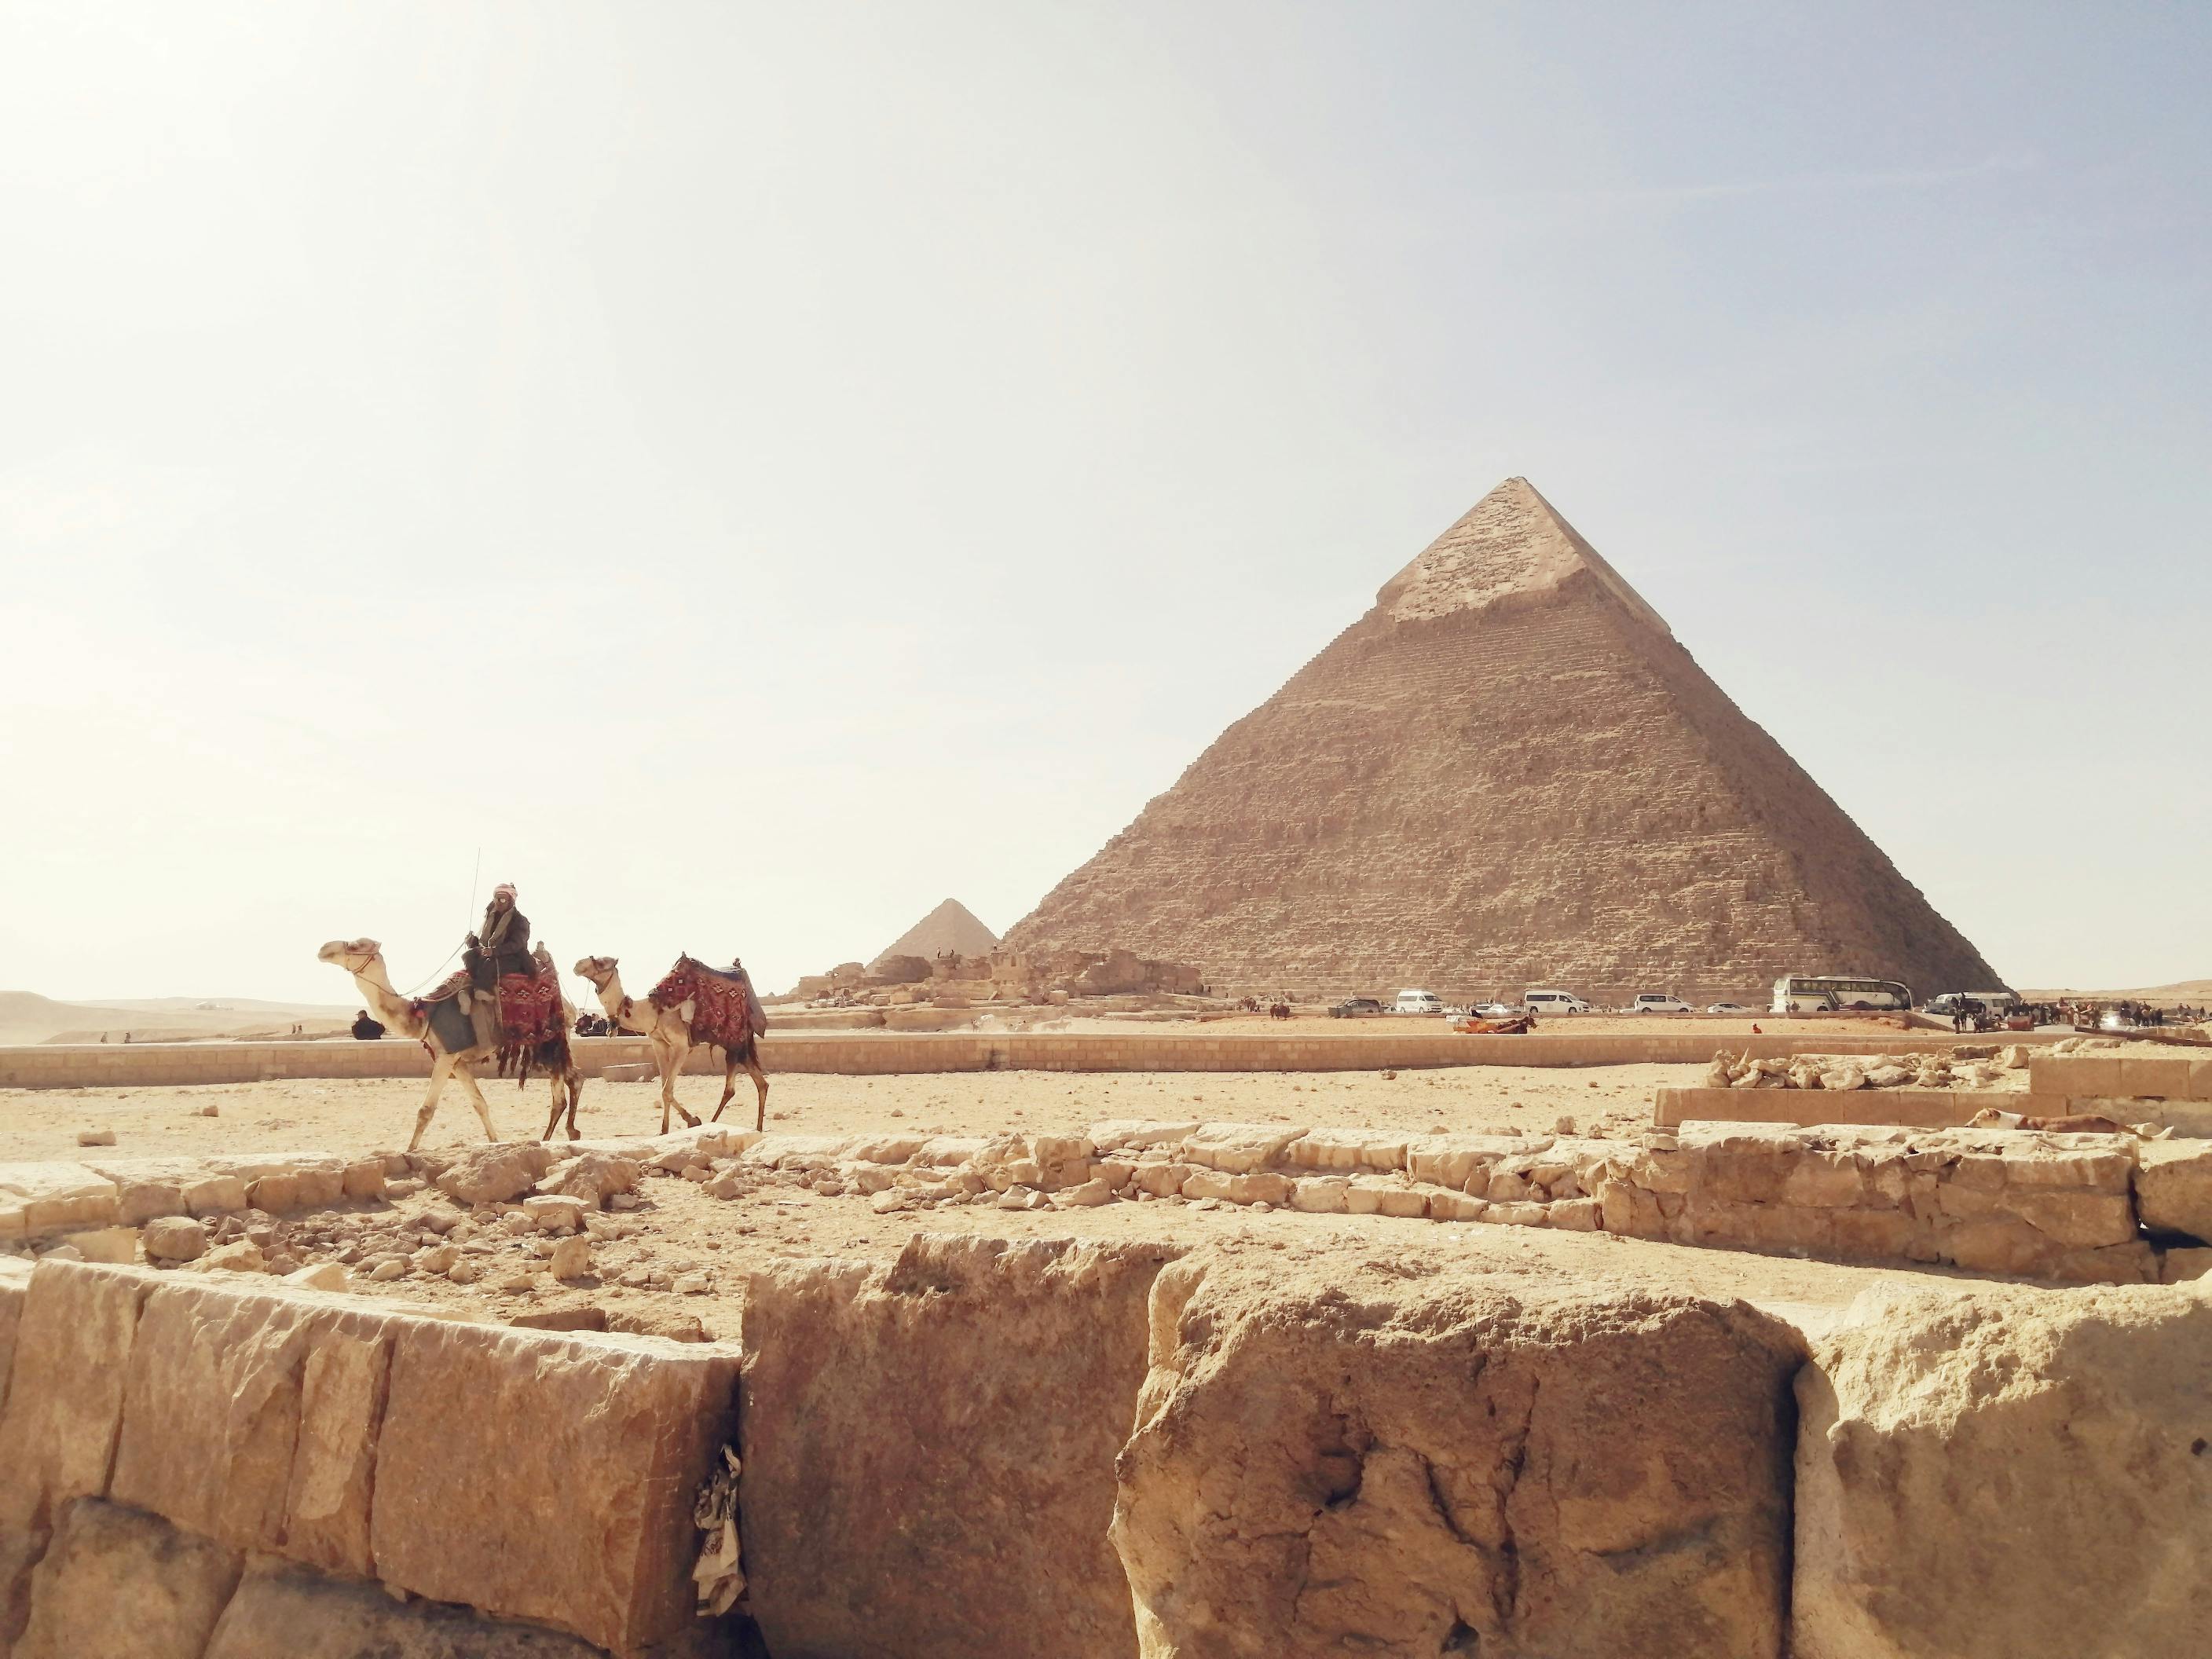 Visiting the Pyramids: Tips for a Memorable Egyptian Adventure